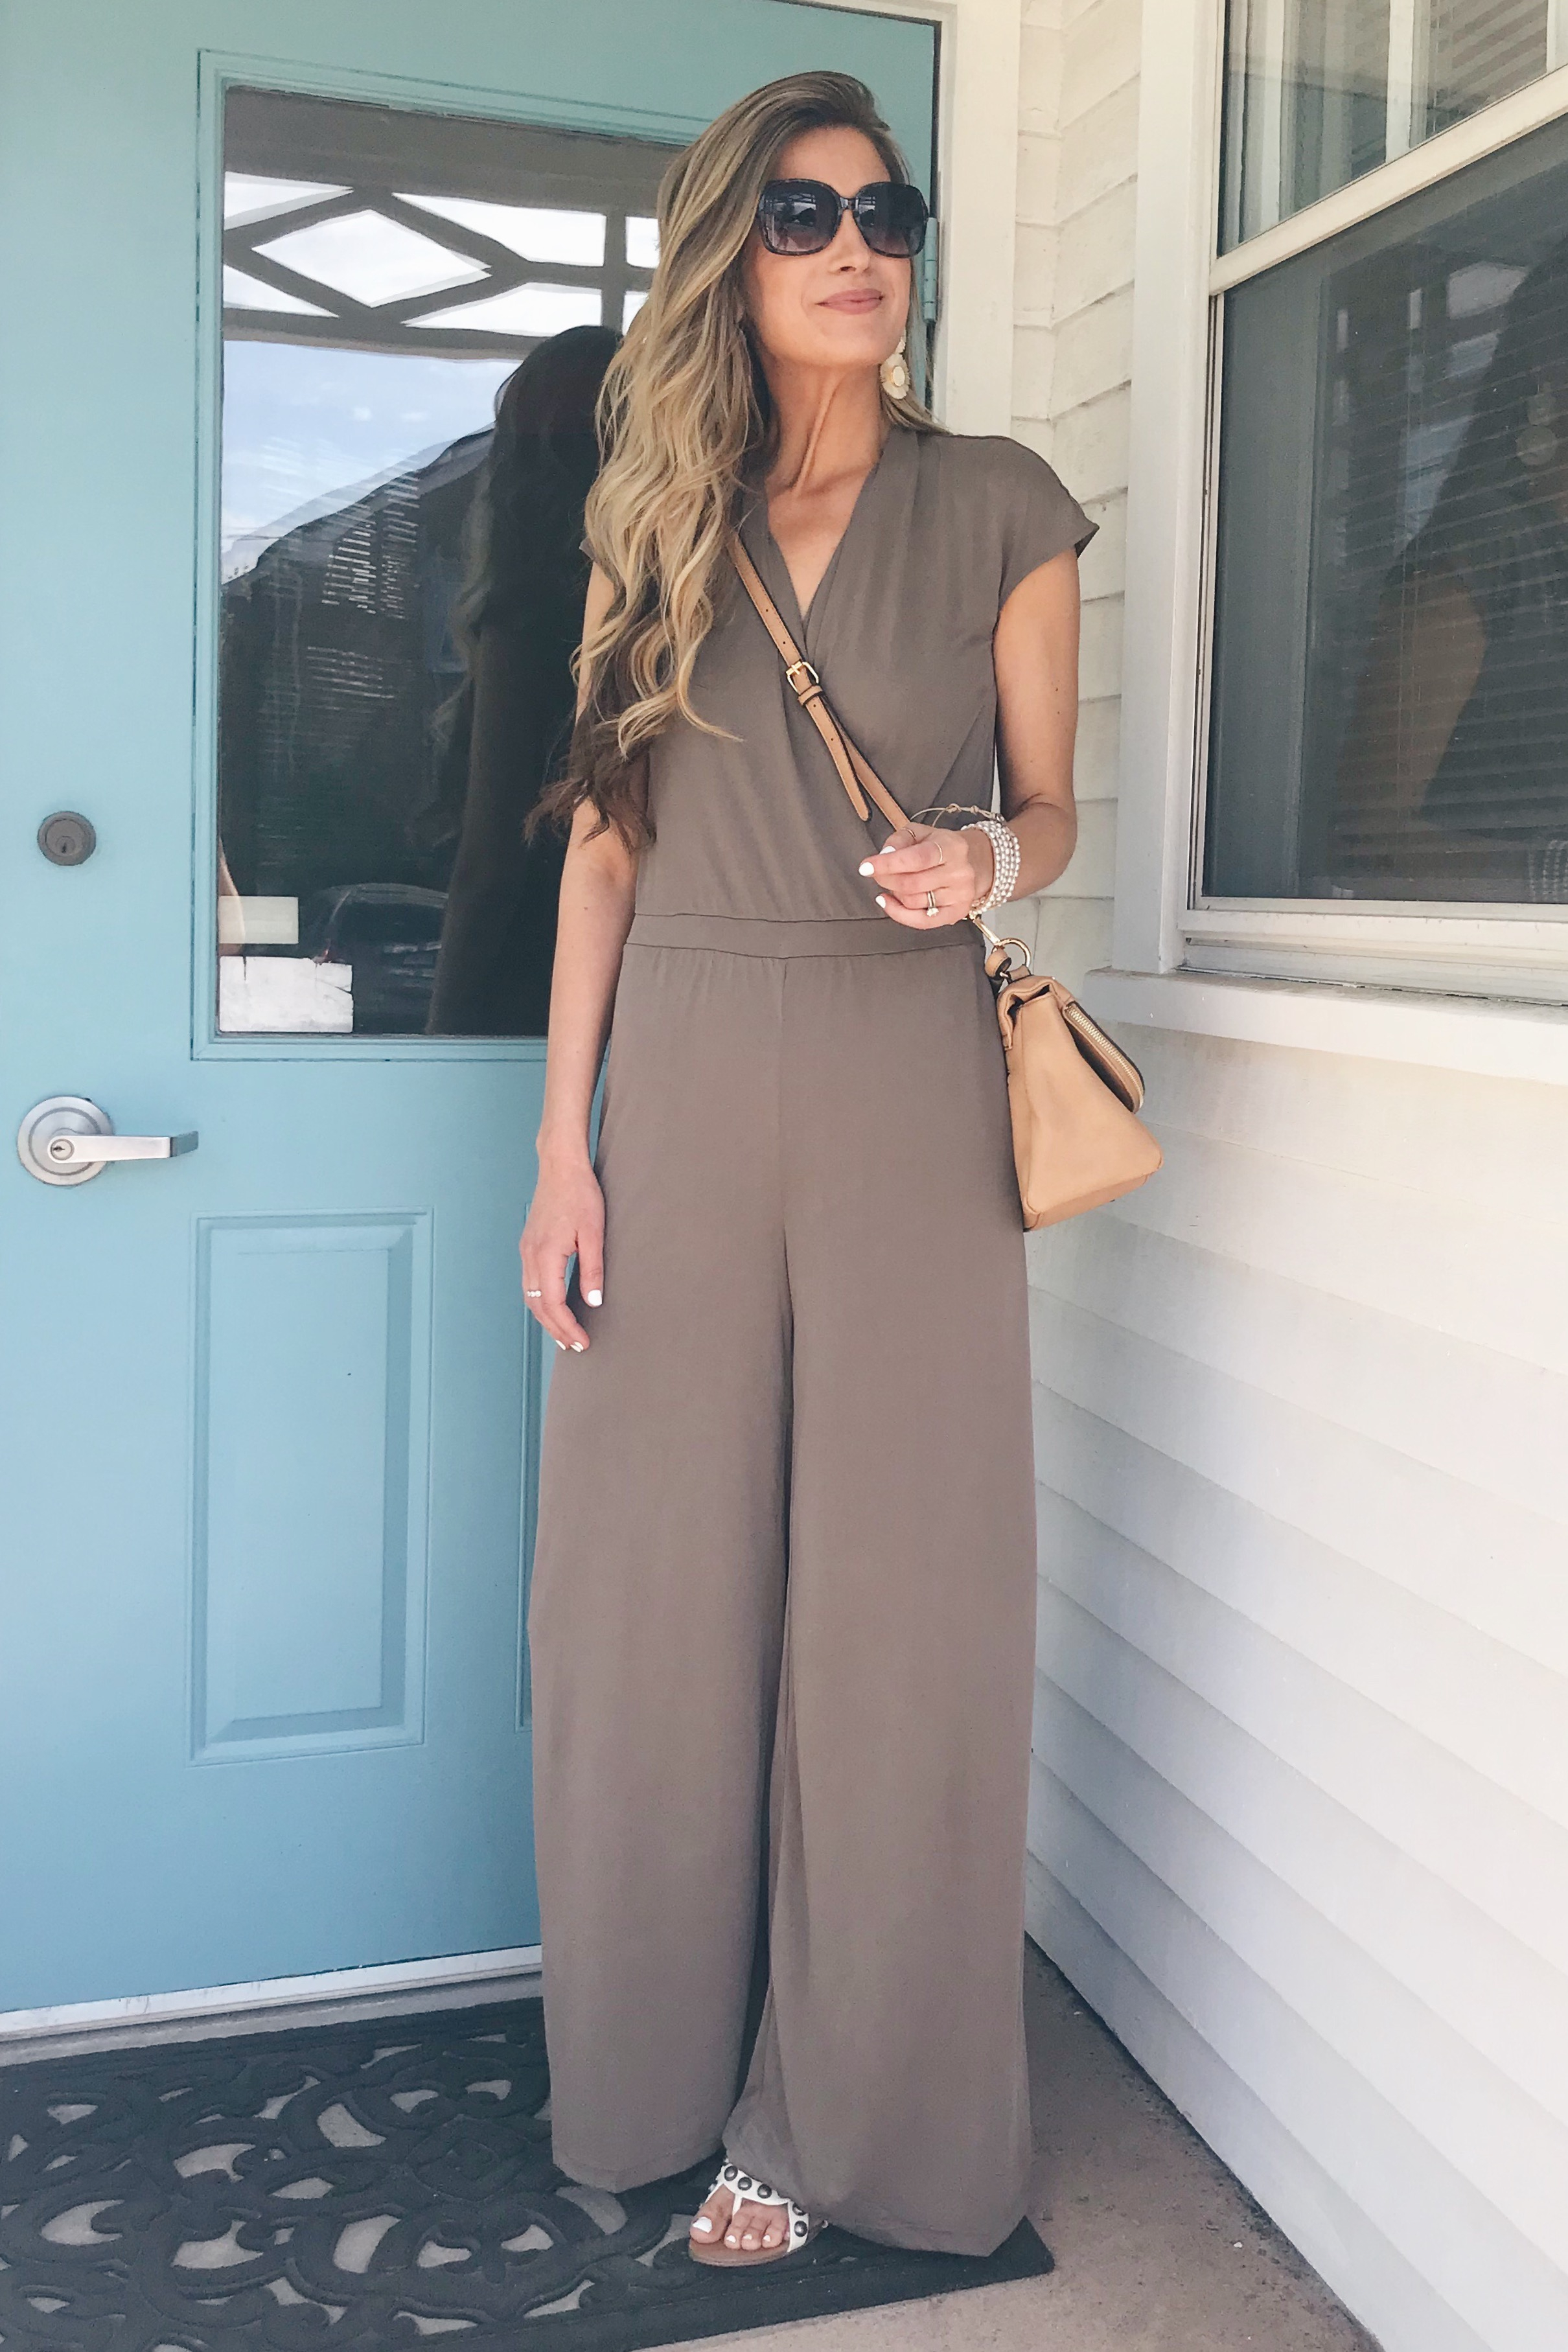 wide leg jumpsuit for a graduation ceremony outfit - pinteresting plans blog and qvc what to wear where